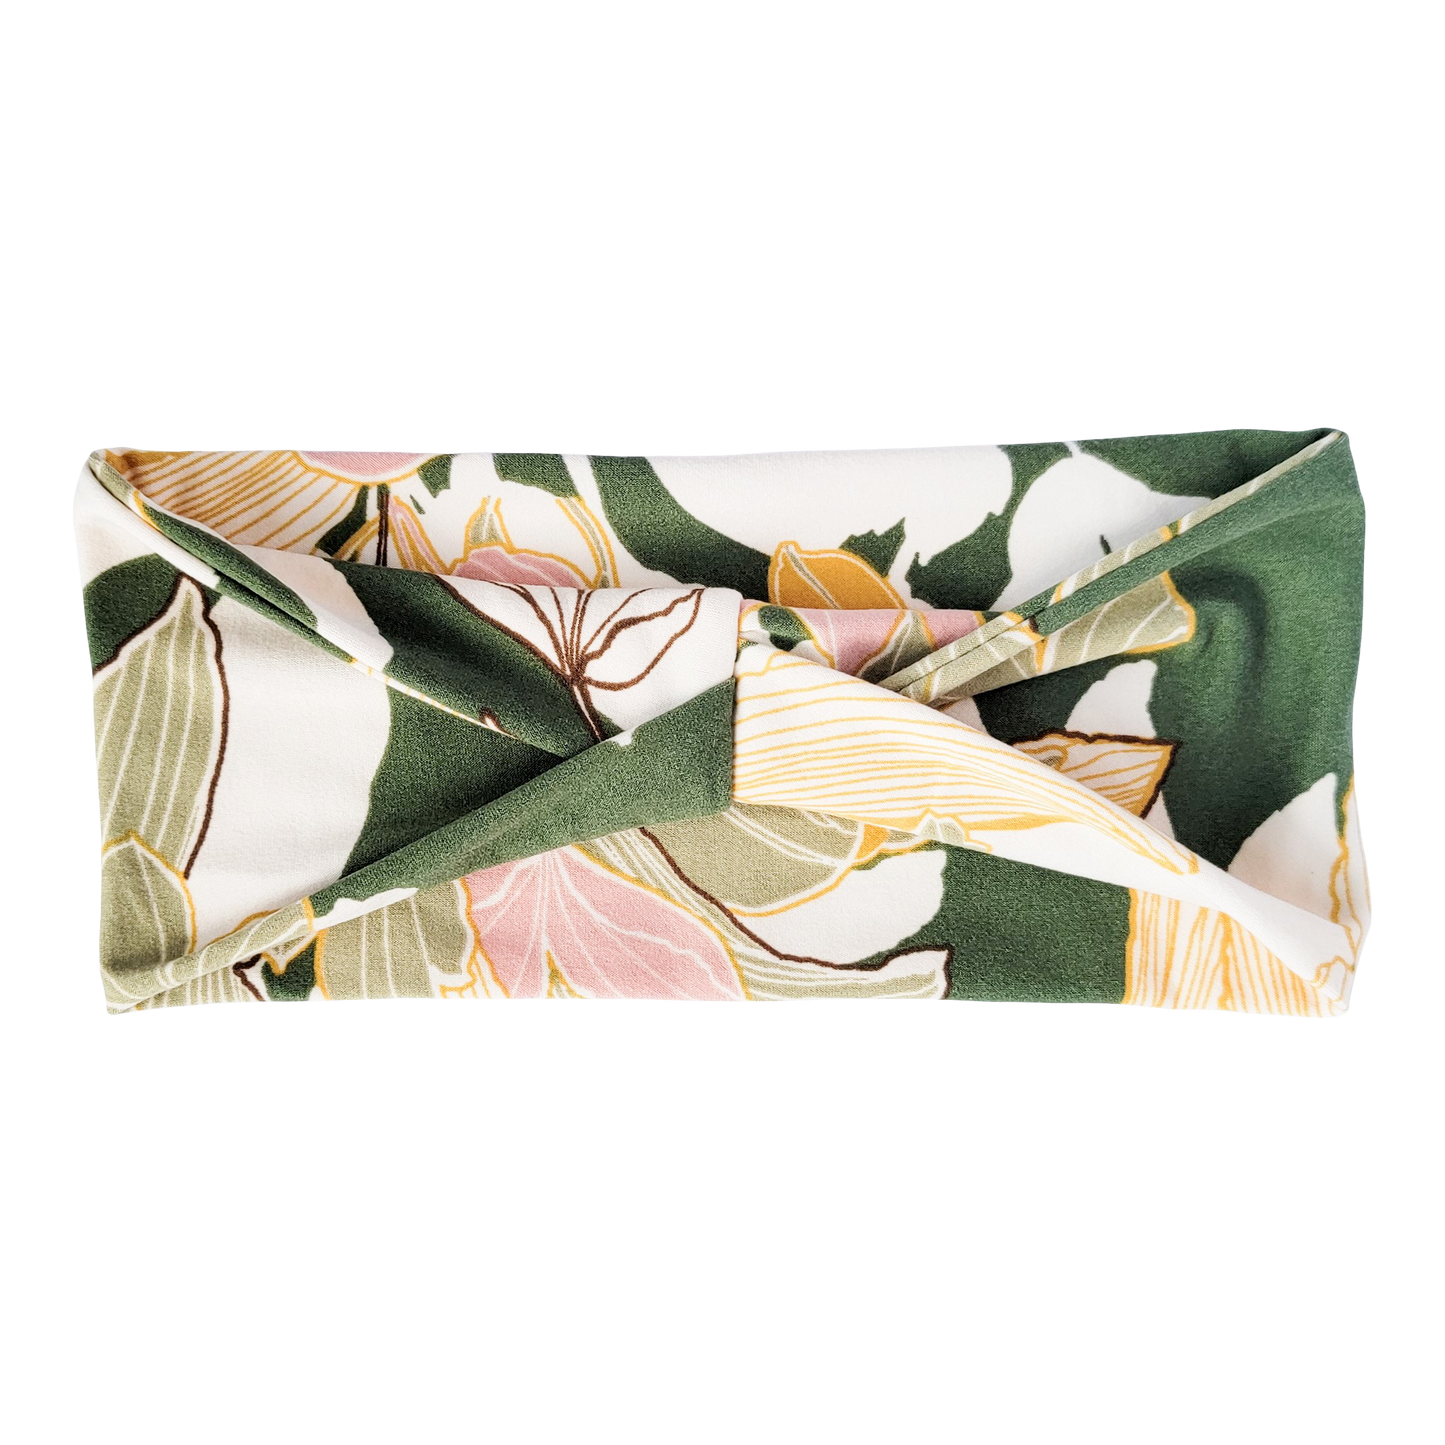 Headband with yellow white and pink flowers on dark green